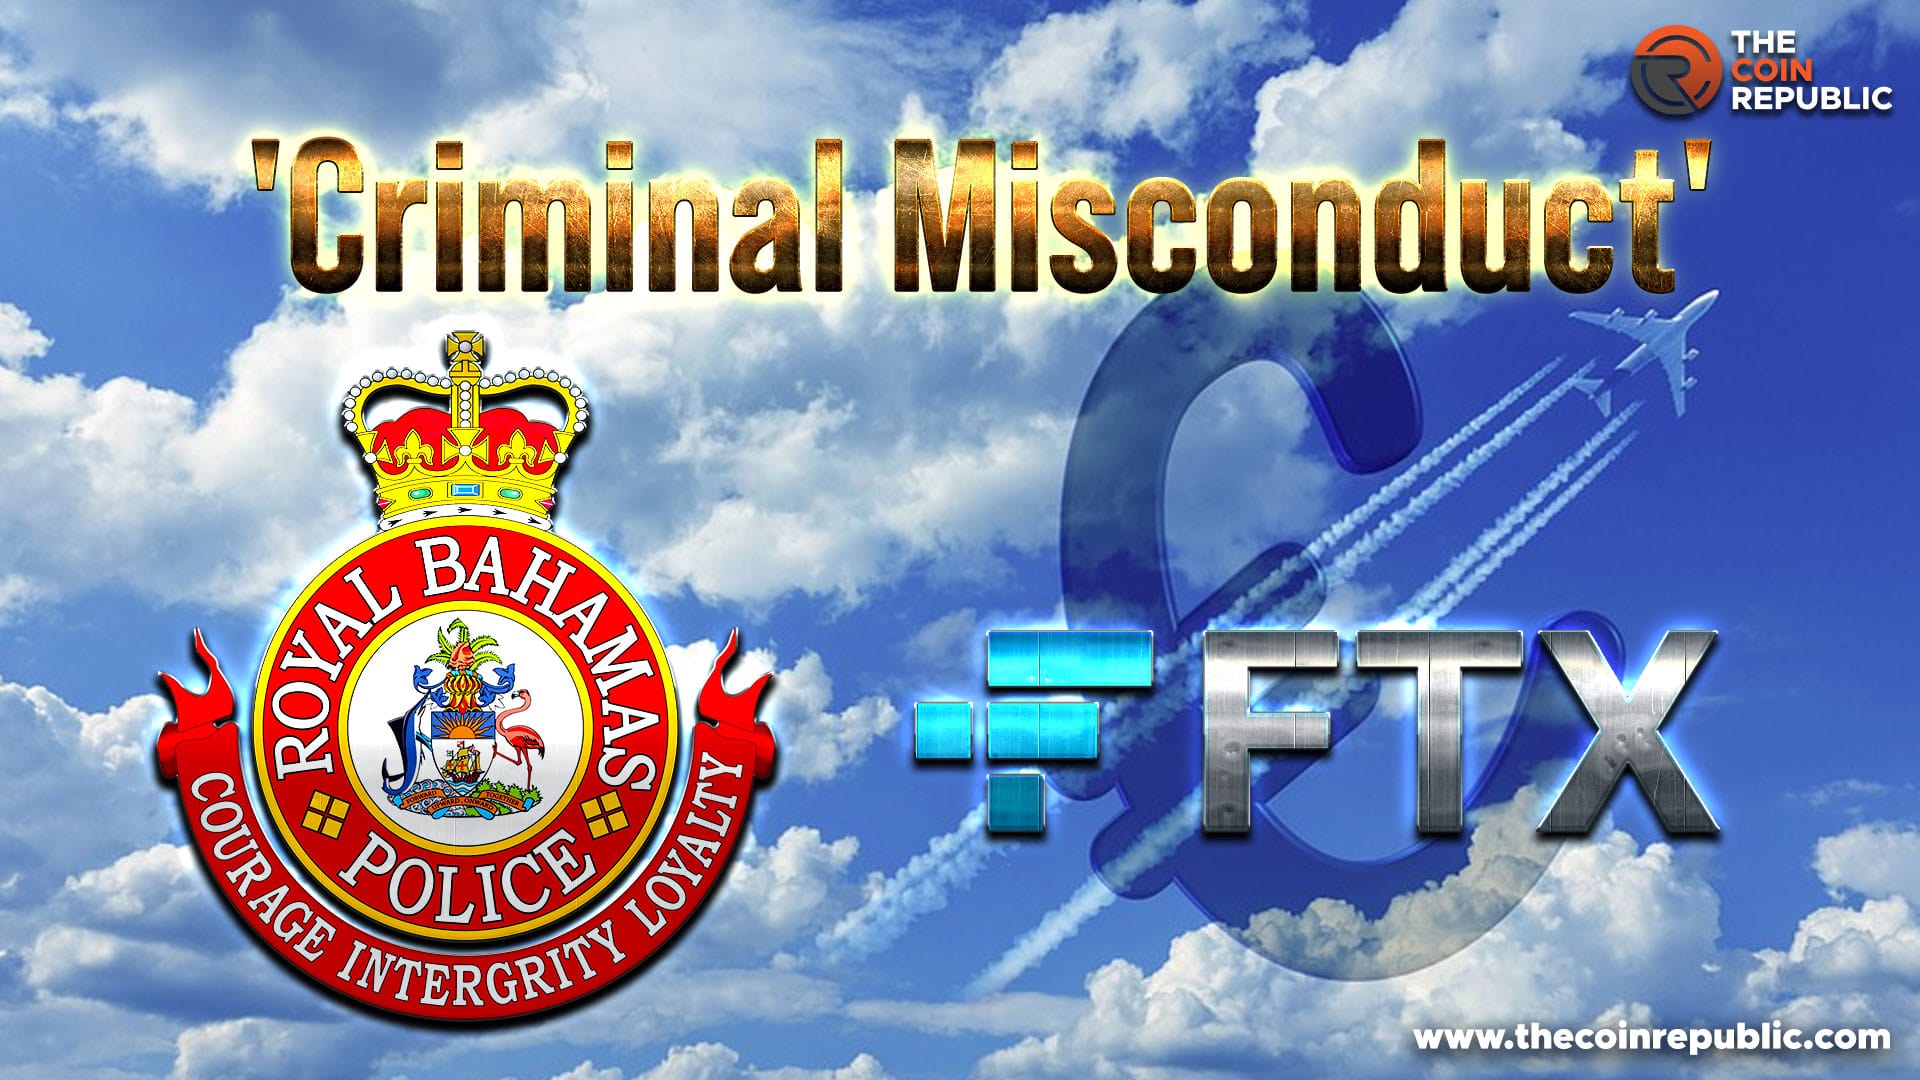 FTX is under investigation for criminal misconduct in the Bahamas